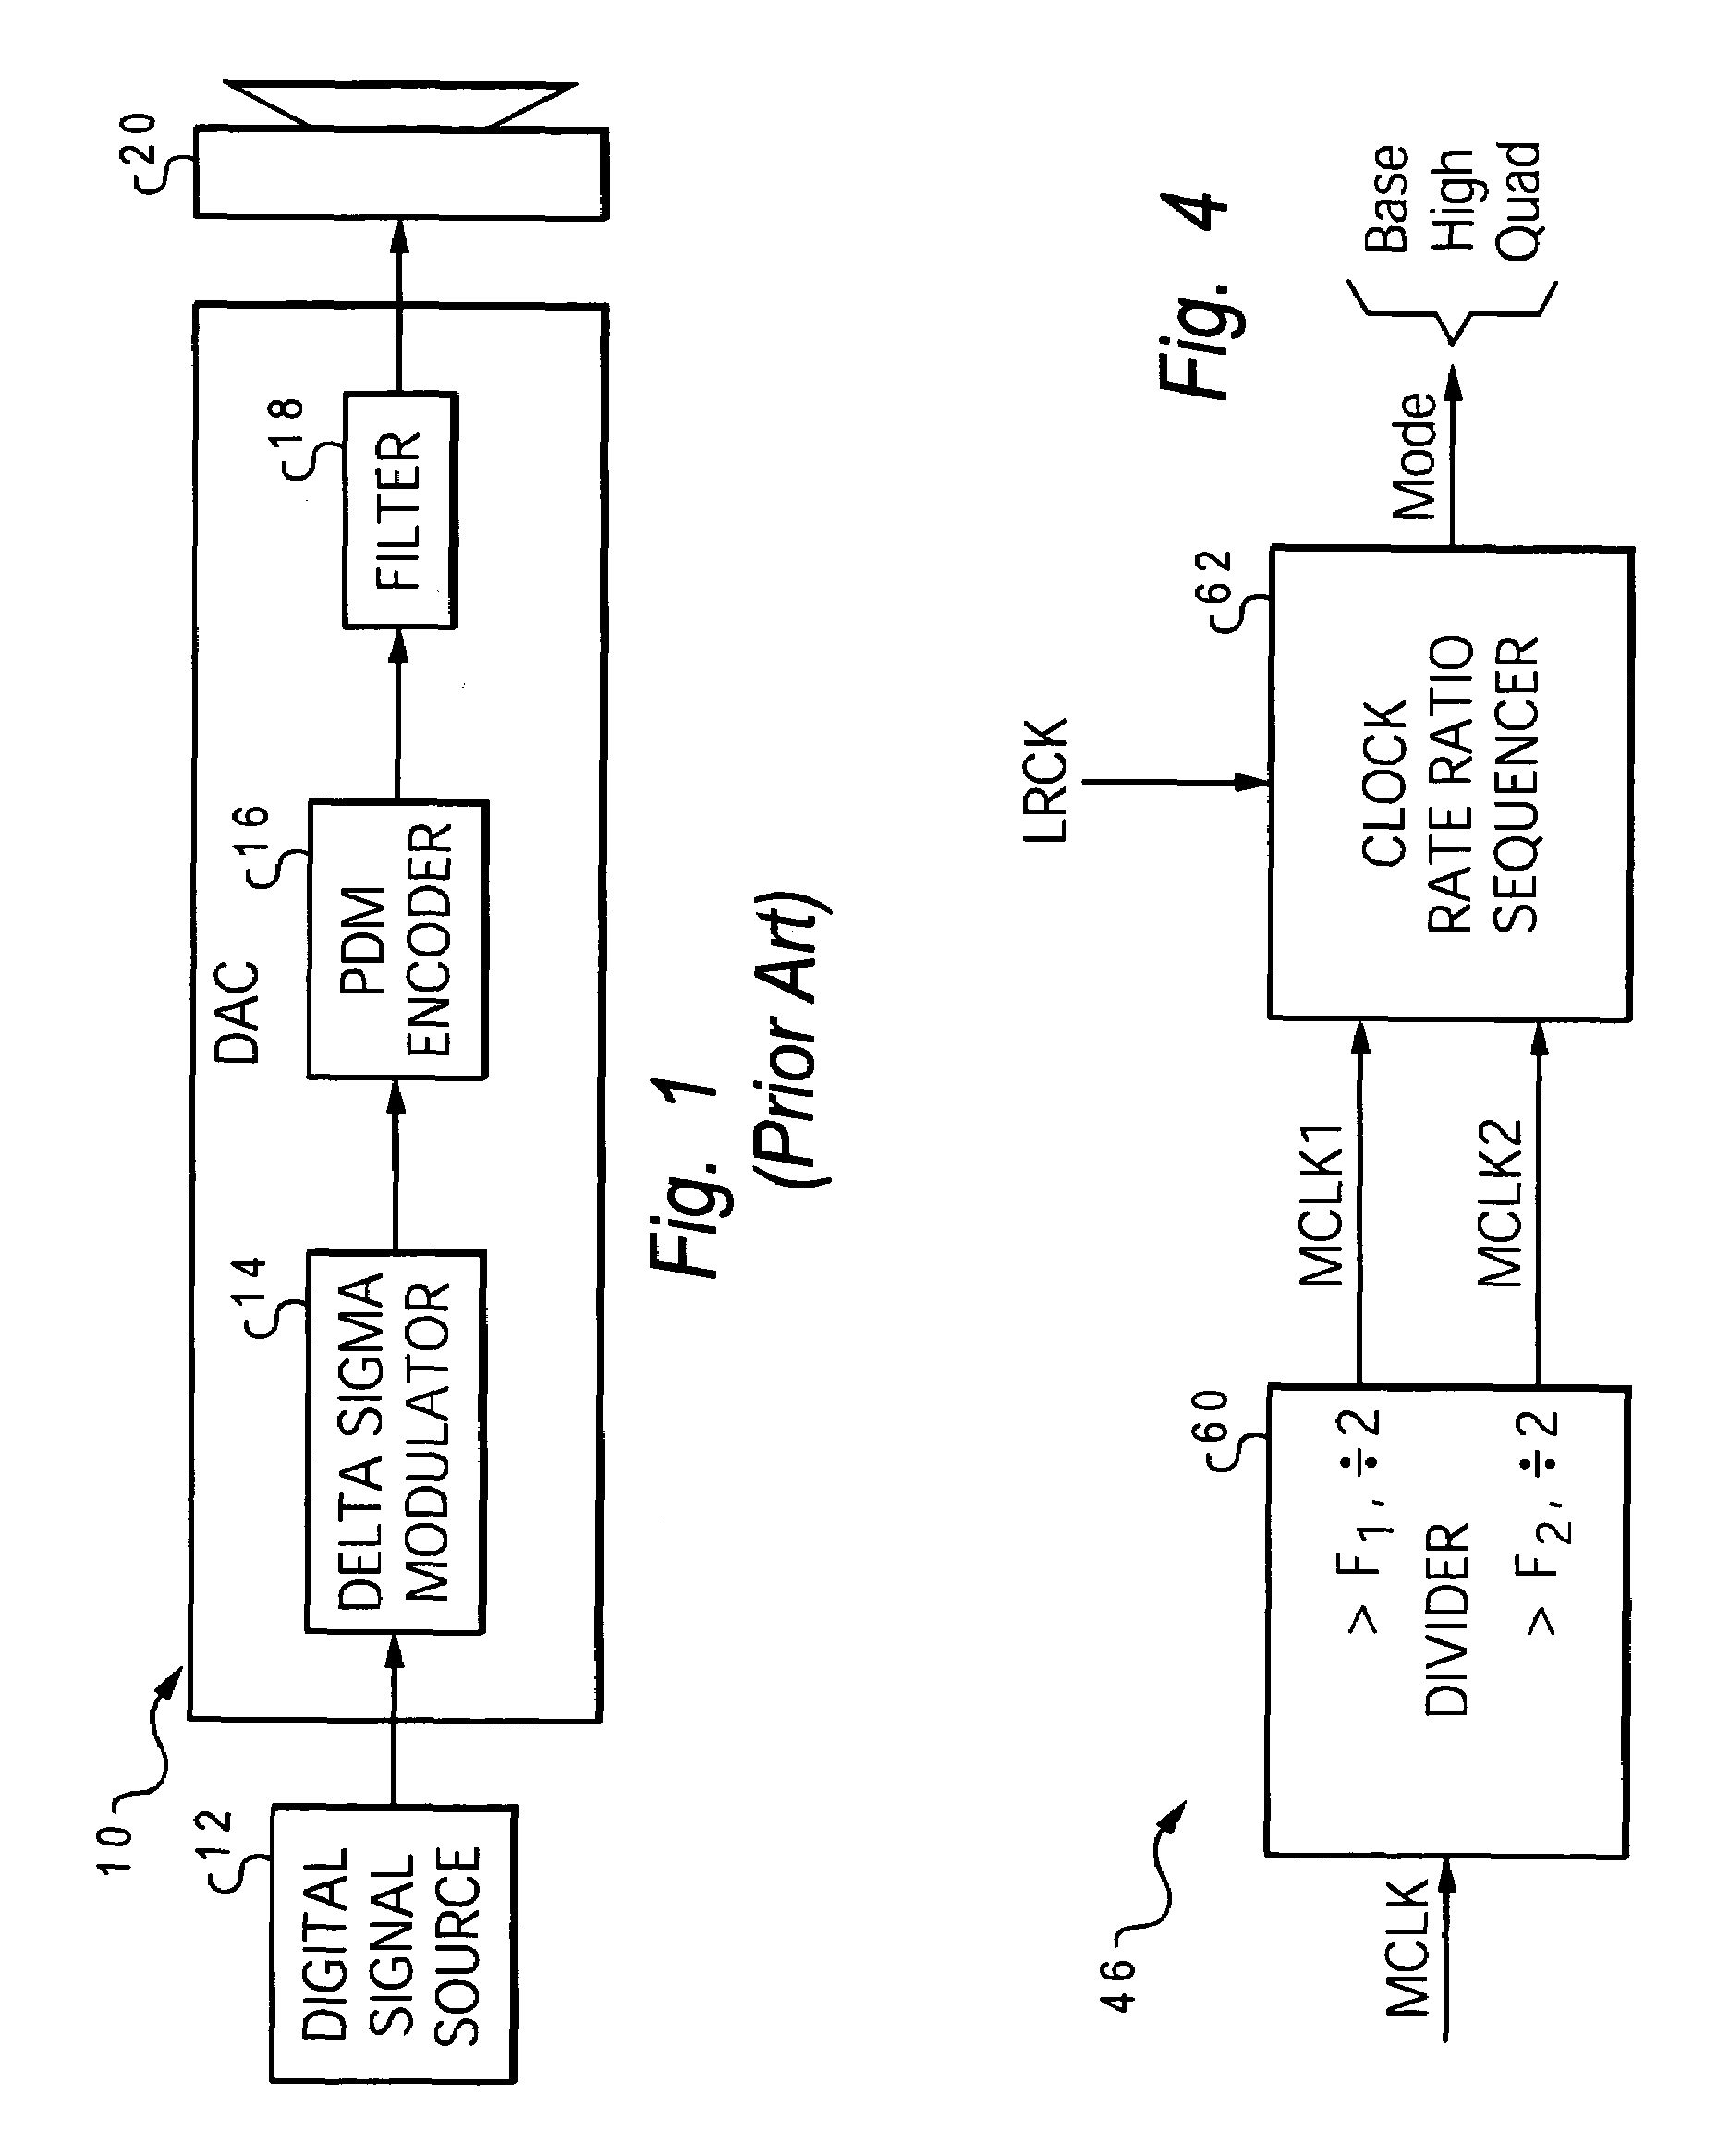 Scheme for determining internal mode using MCLK frequency autodetect